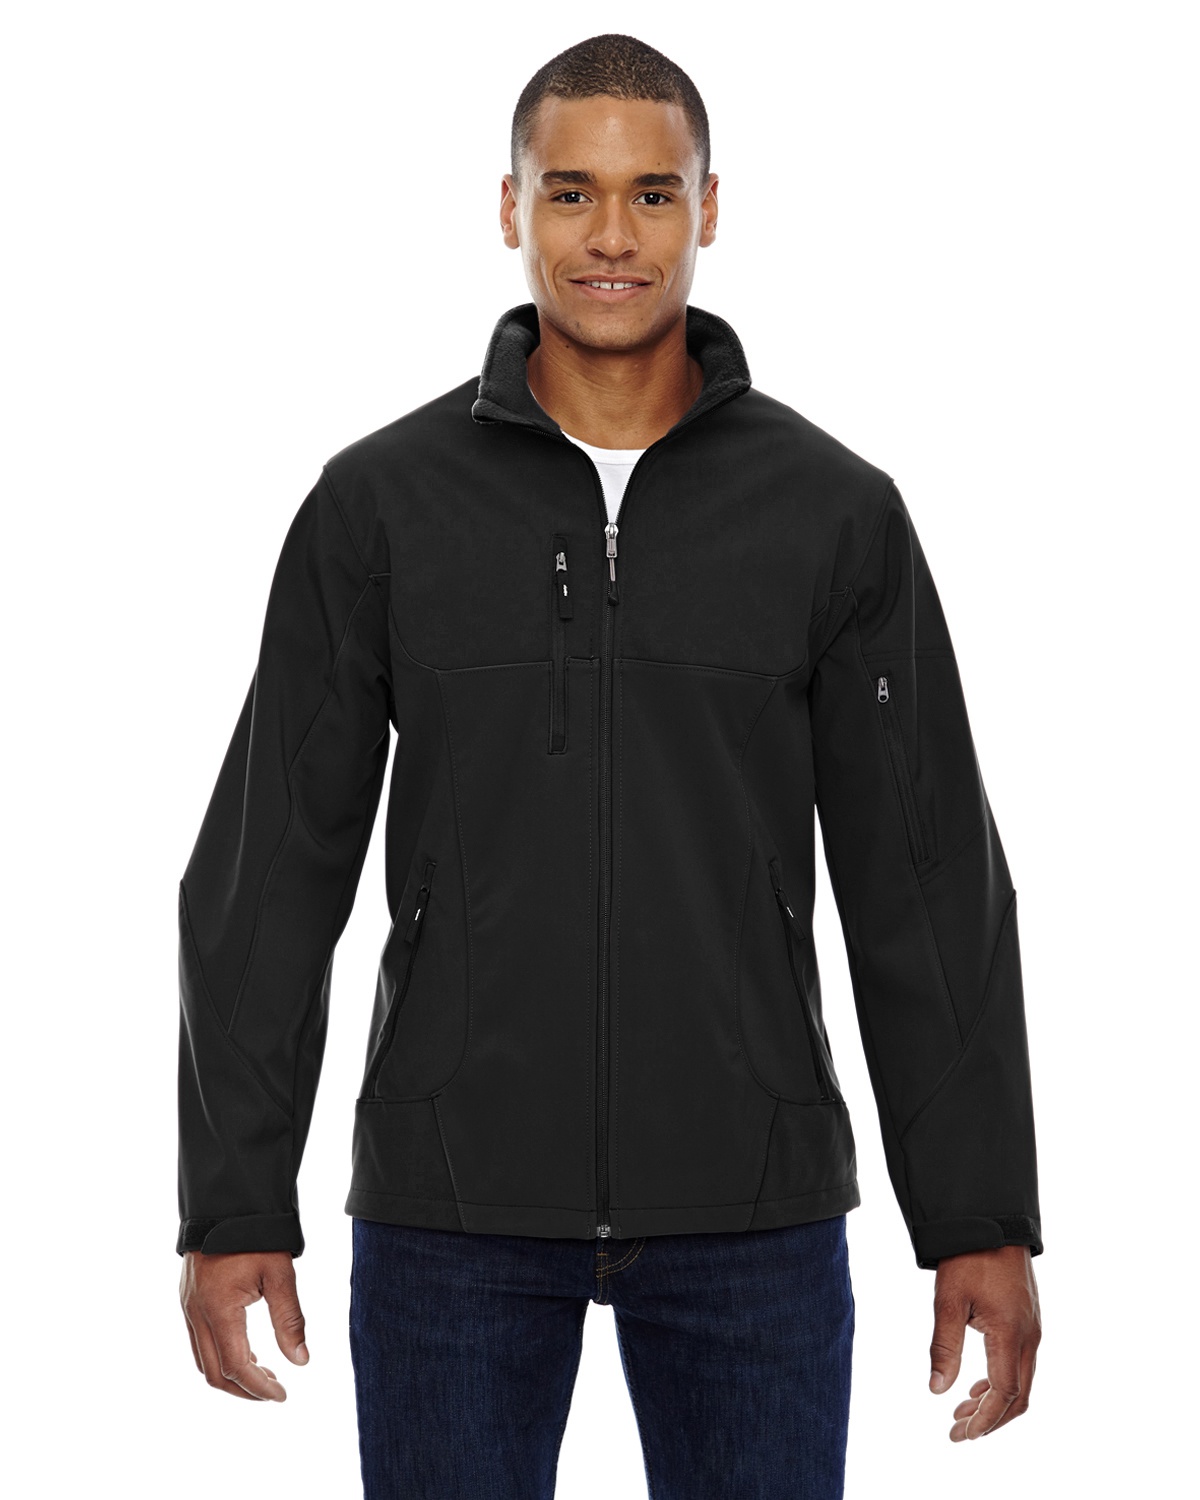 'Ash City - North End 88156 Men's Compass Colorblock Three-Layer Fleece Bonded Soft Shell Jacket'